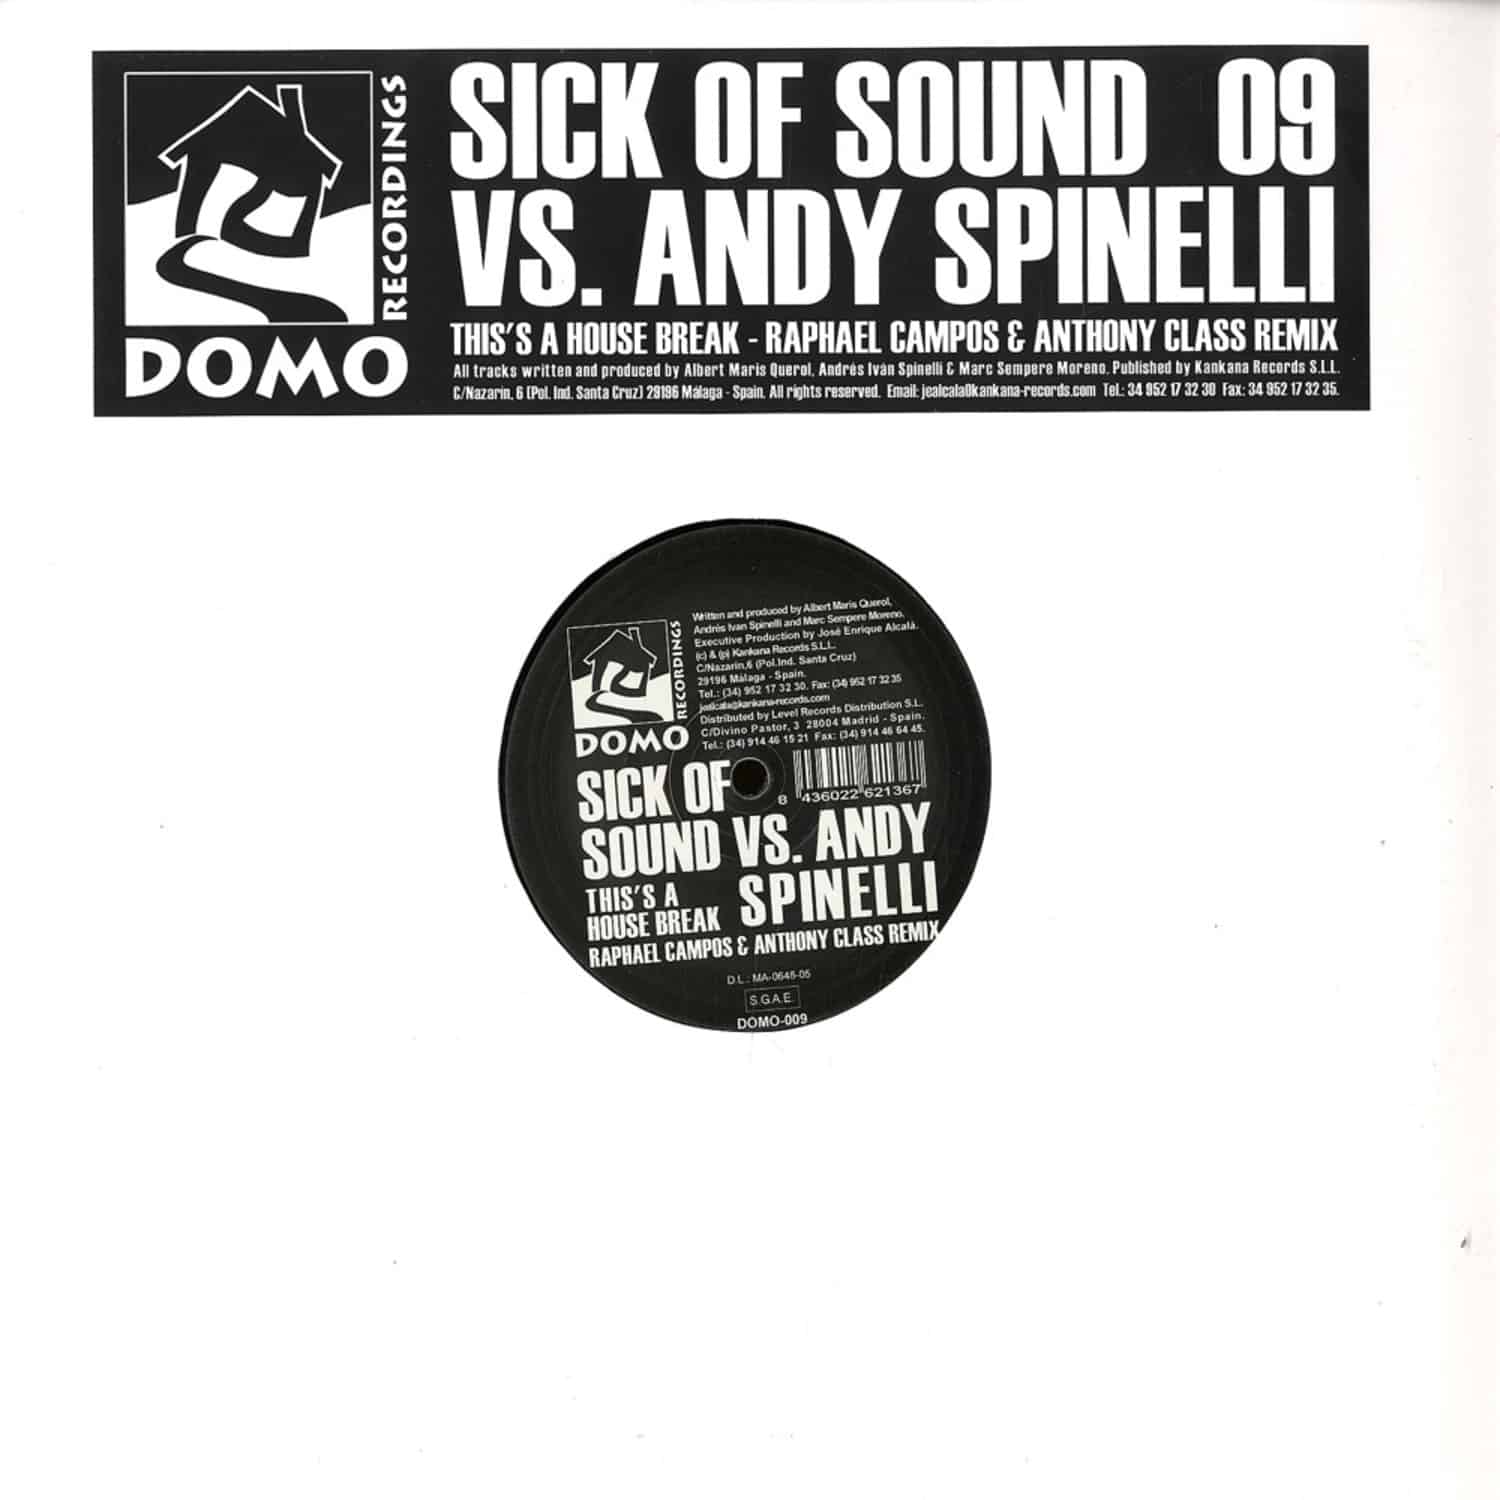 Sick Of Sound vs Andy Spinelli - THIS IS A HOUSE BREAK